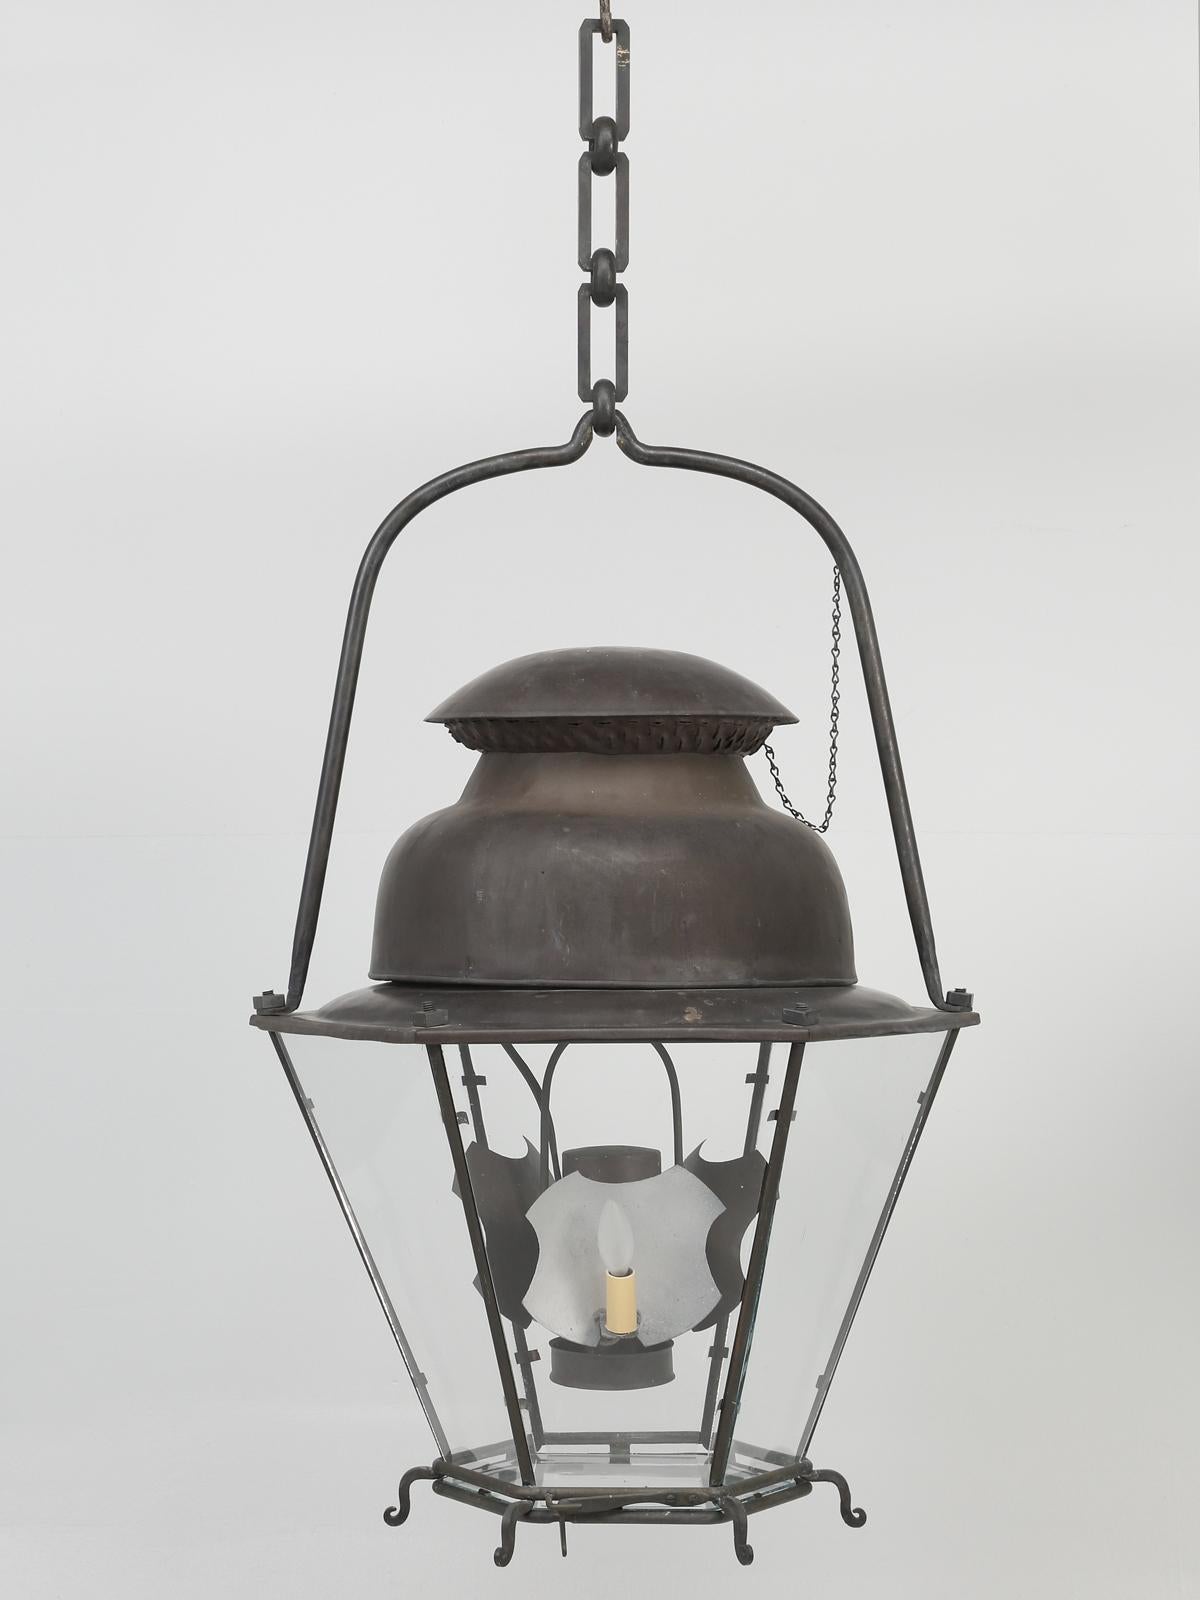 American French 18th Century Style Copper Lanterns from the Original French Blueprints